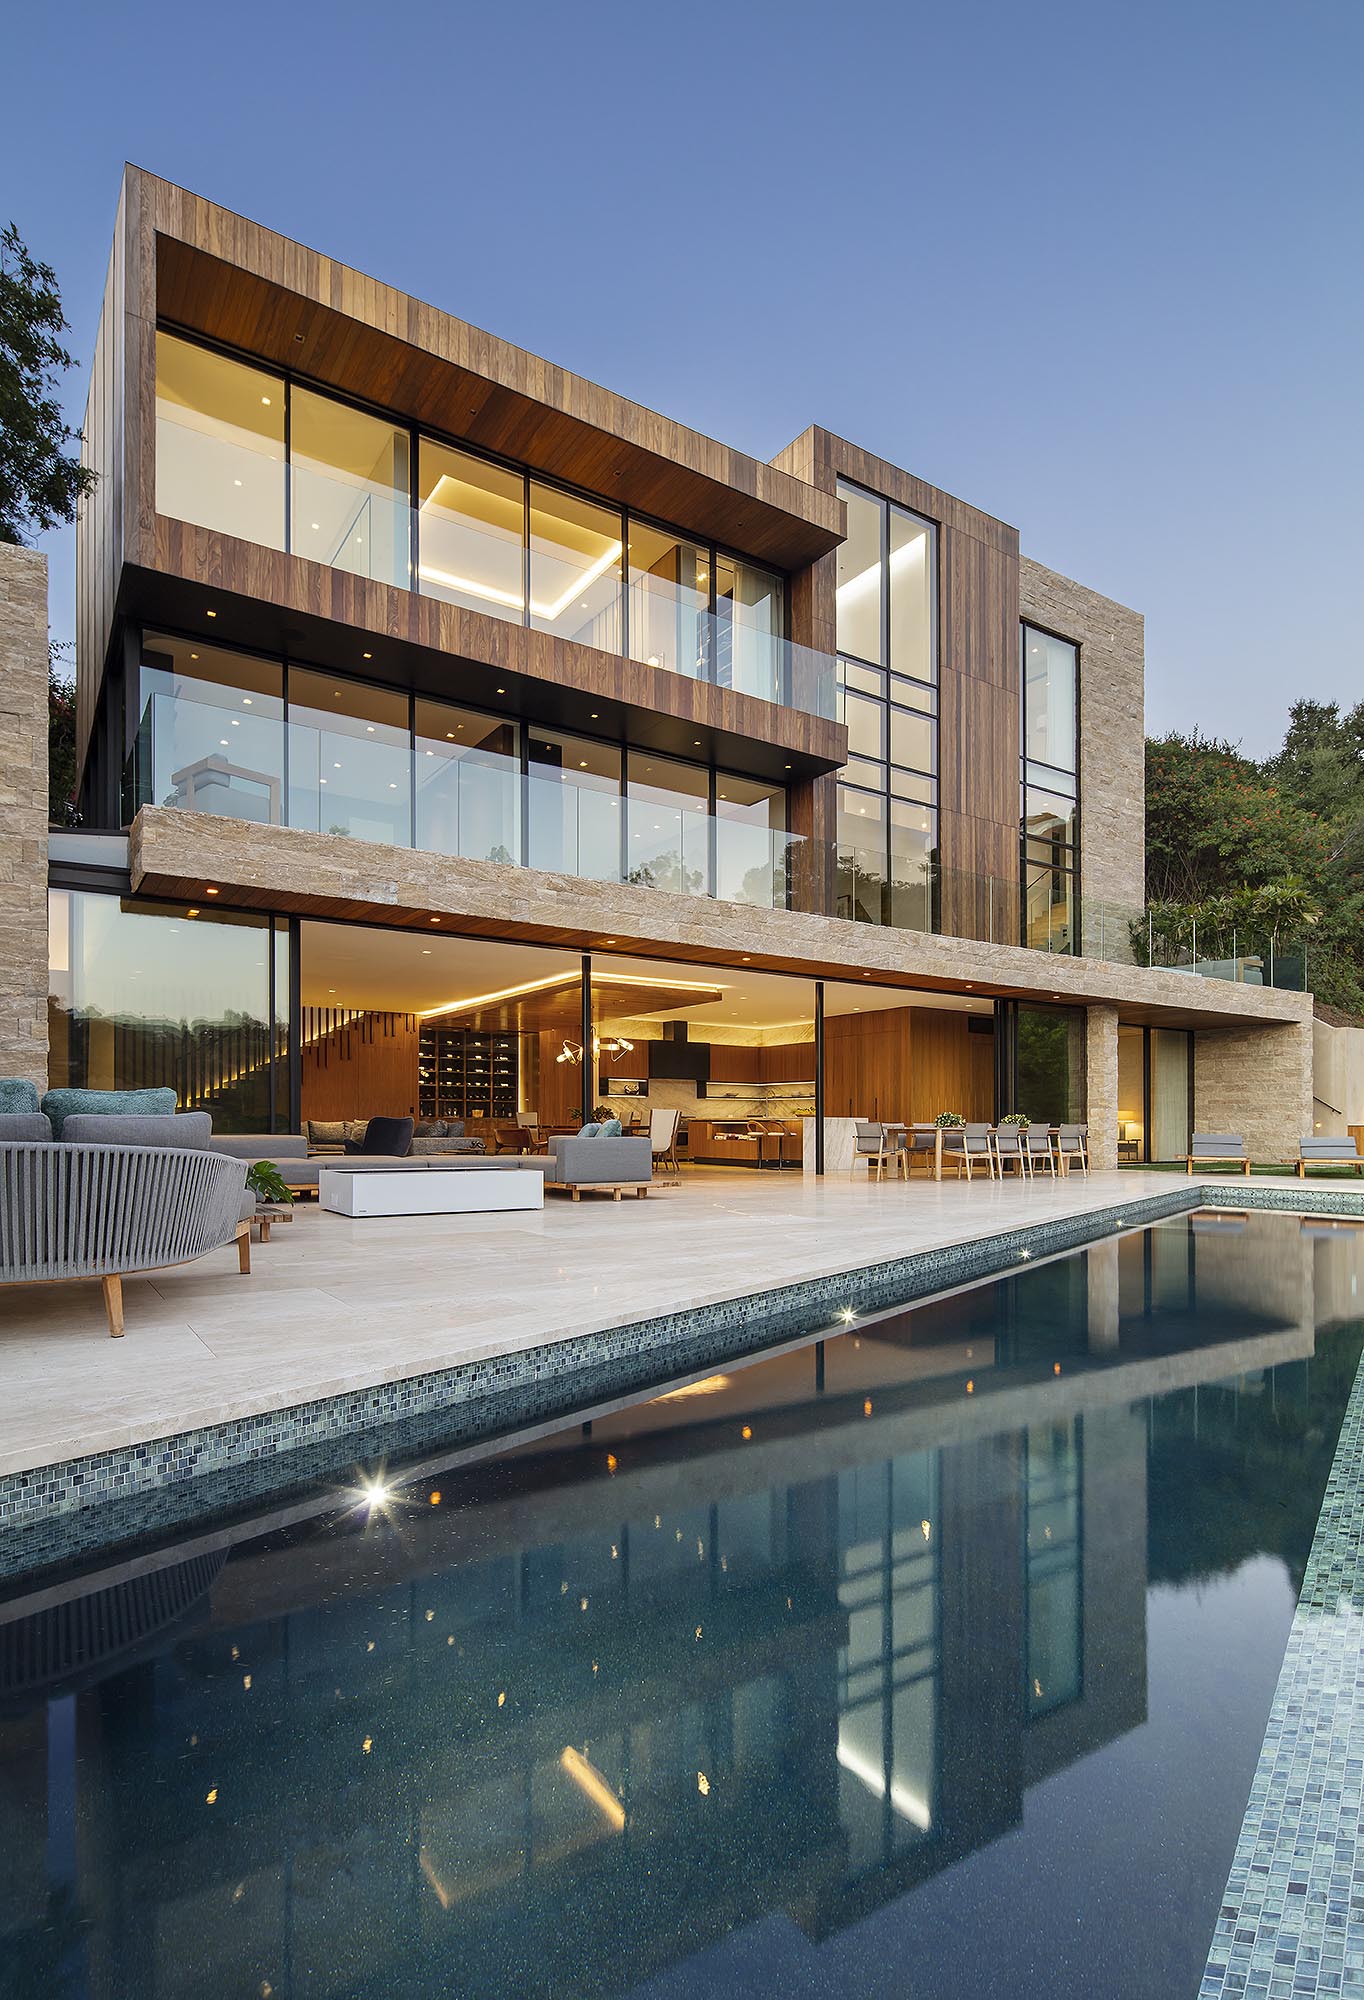 A modern house has oversized sliding glass doors that open to a large patio, outdoor kitchen, and swimming pool.